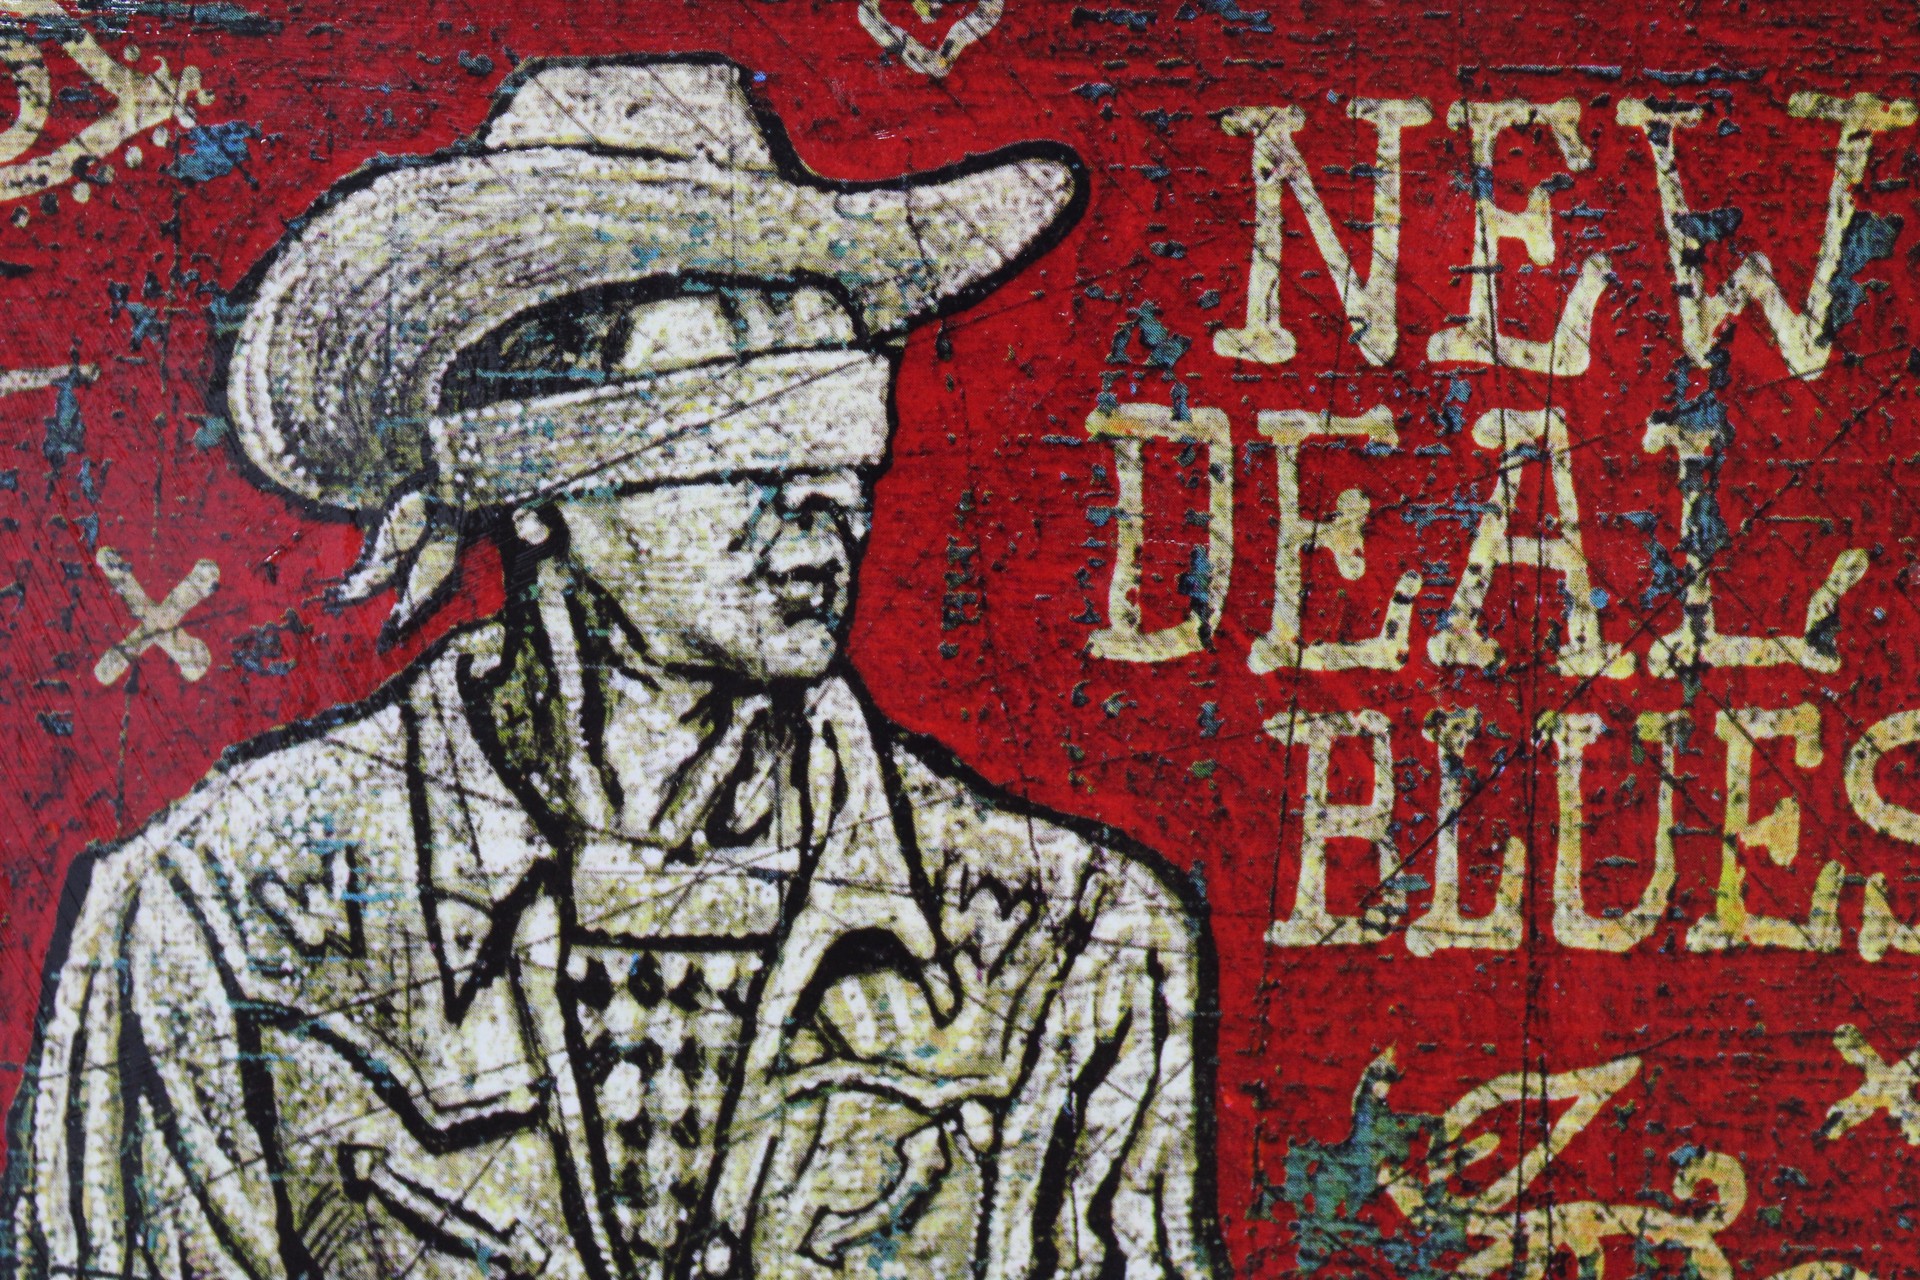 New Deal Blues by Jon Langford